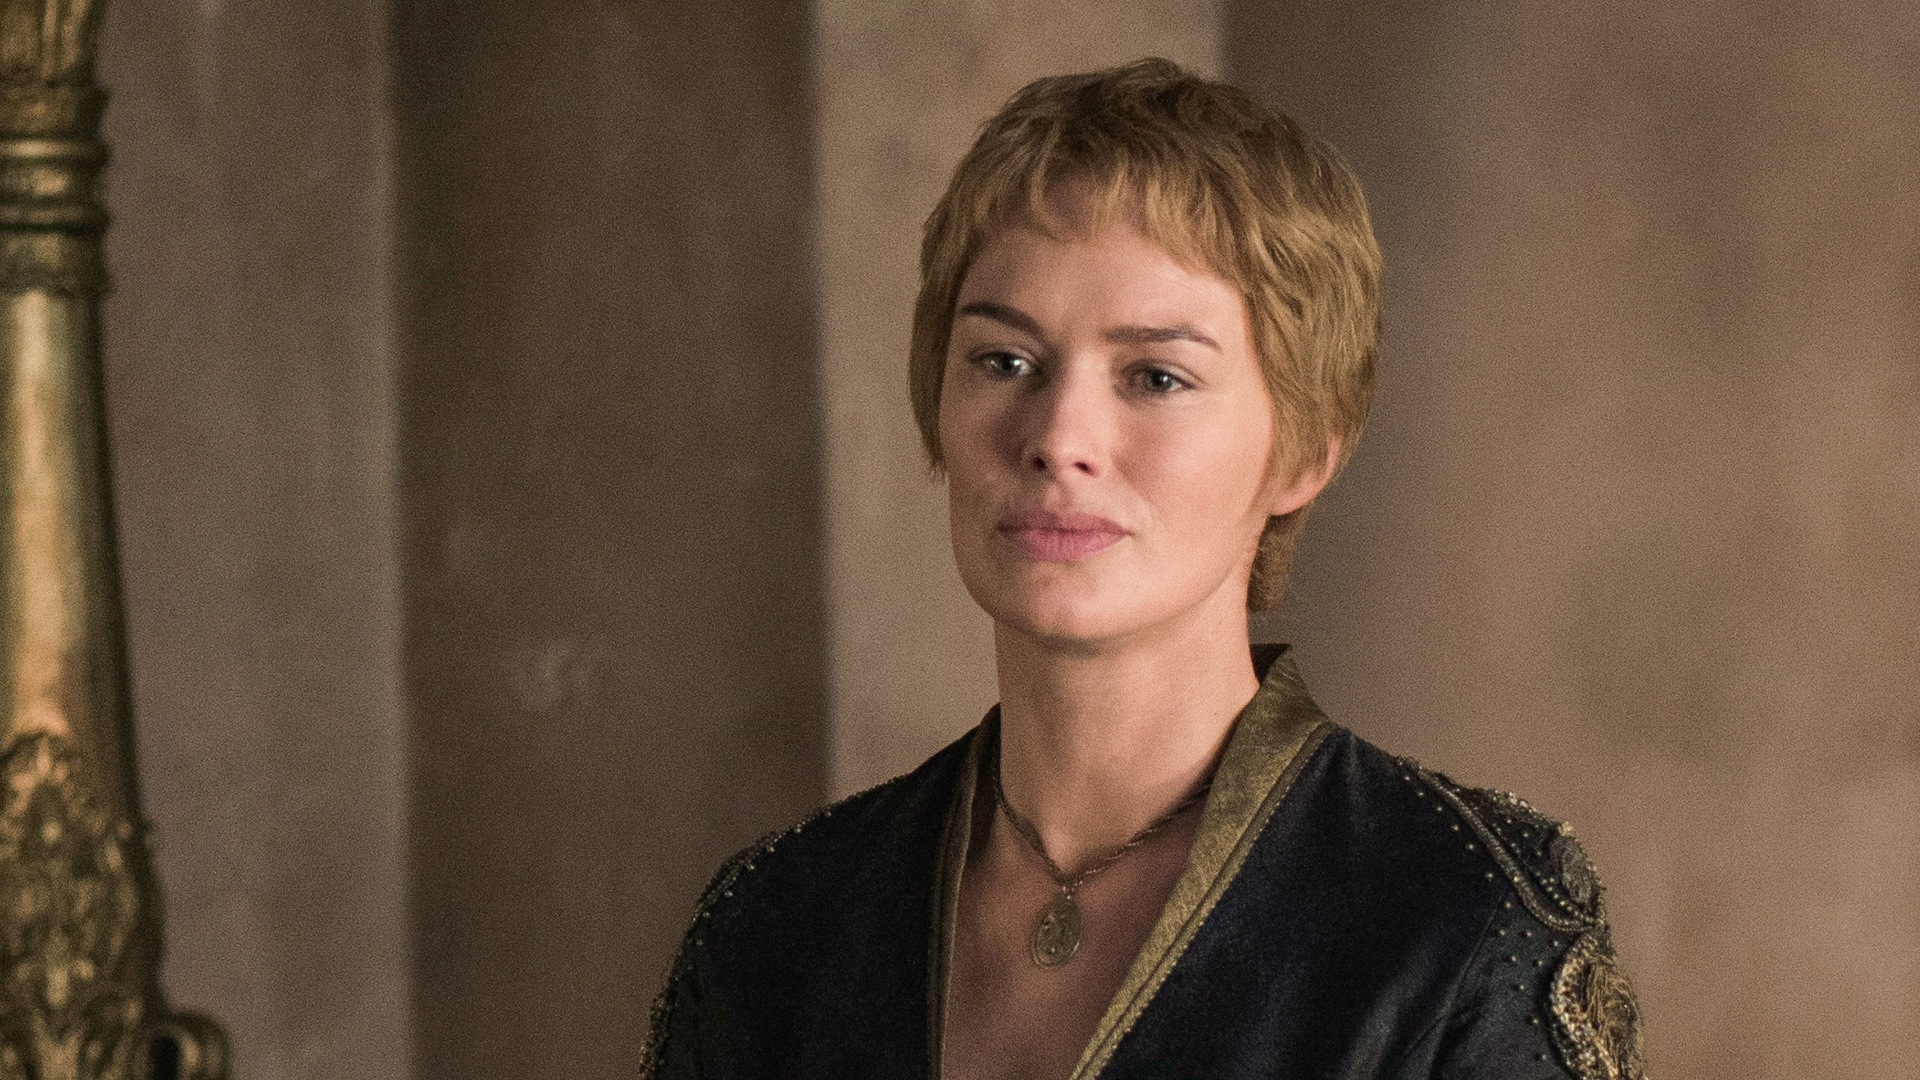 Cersei Lannister stares ahead in Game of Thrones